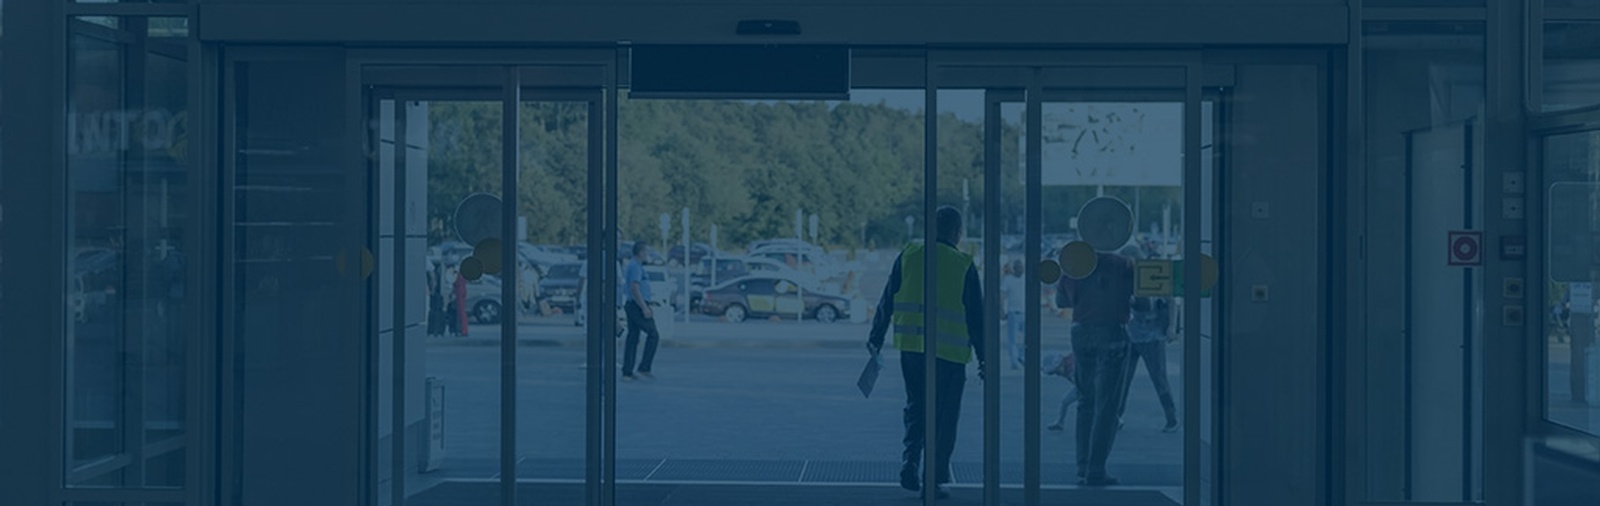 Access Control, Automatic Doors & Security Camera Installation in Brantford, ON